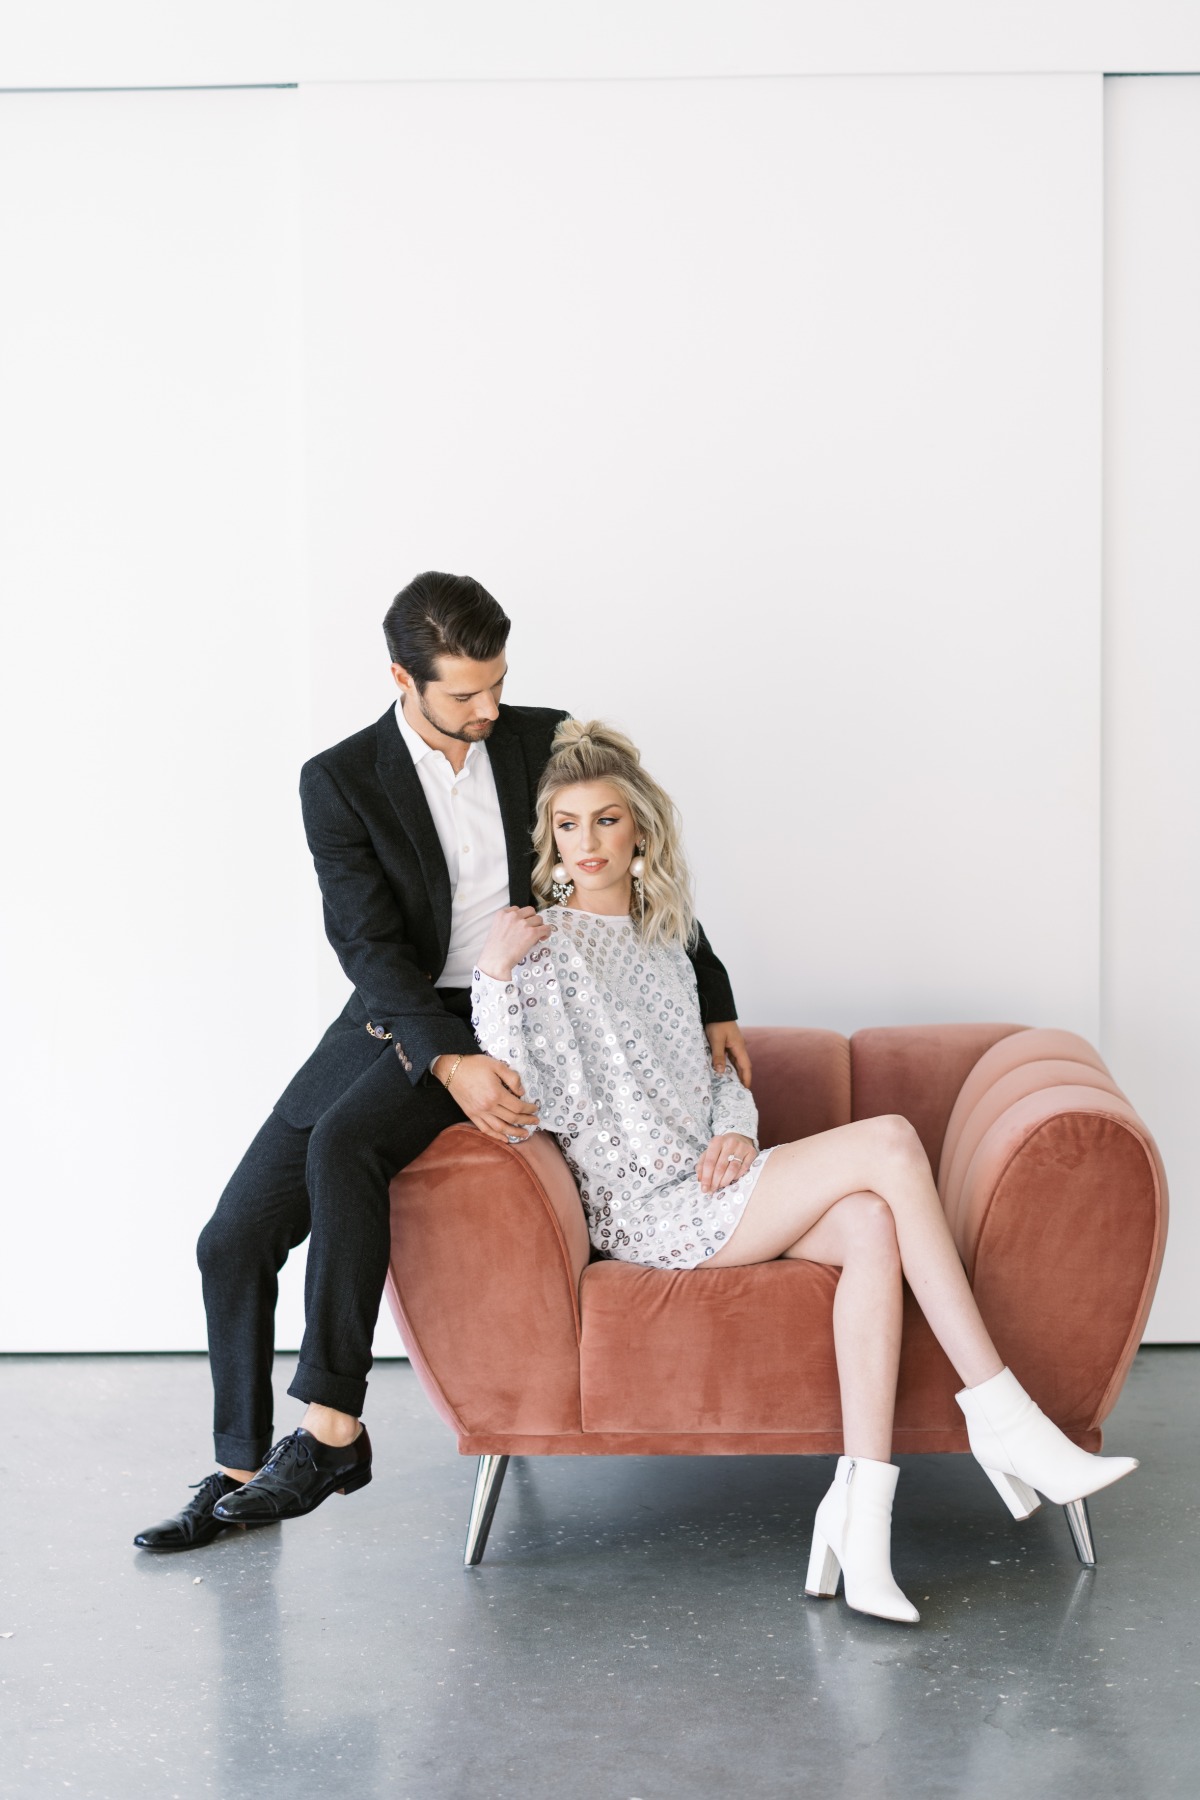 Three Words, Eight Letters: A City Inspired Elopement Shoot